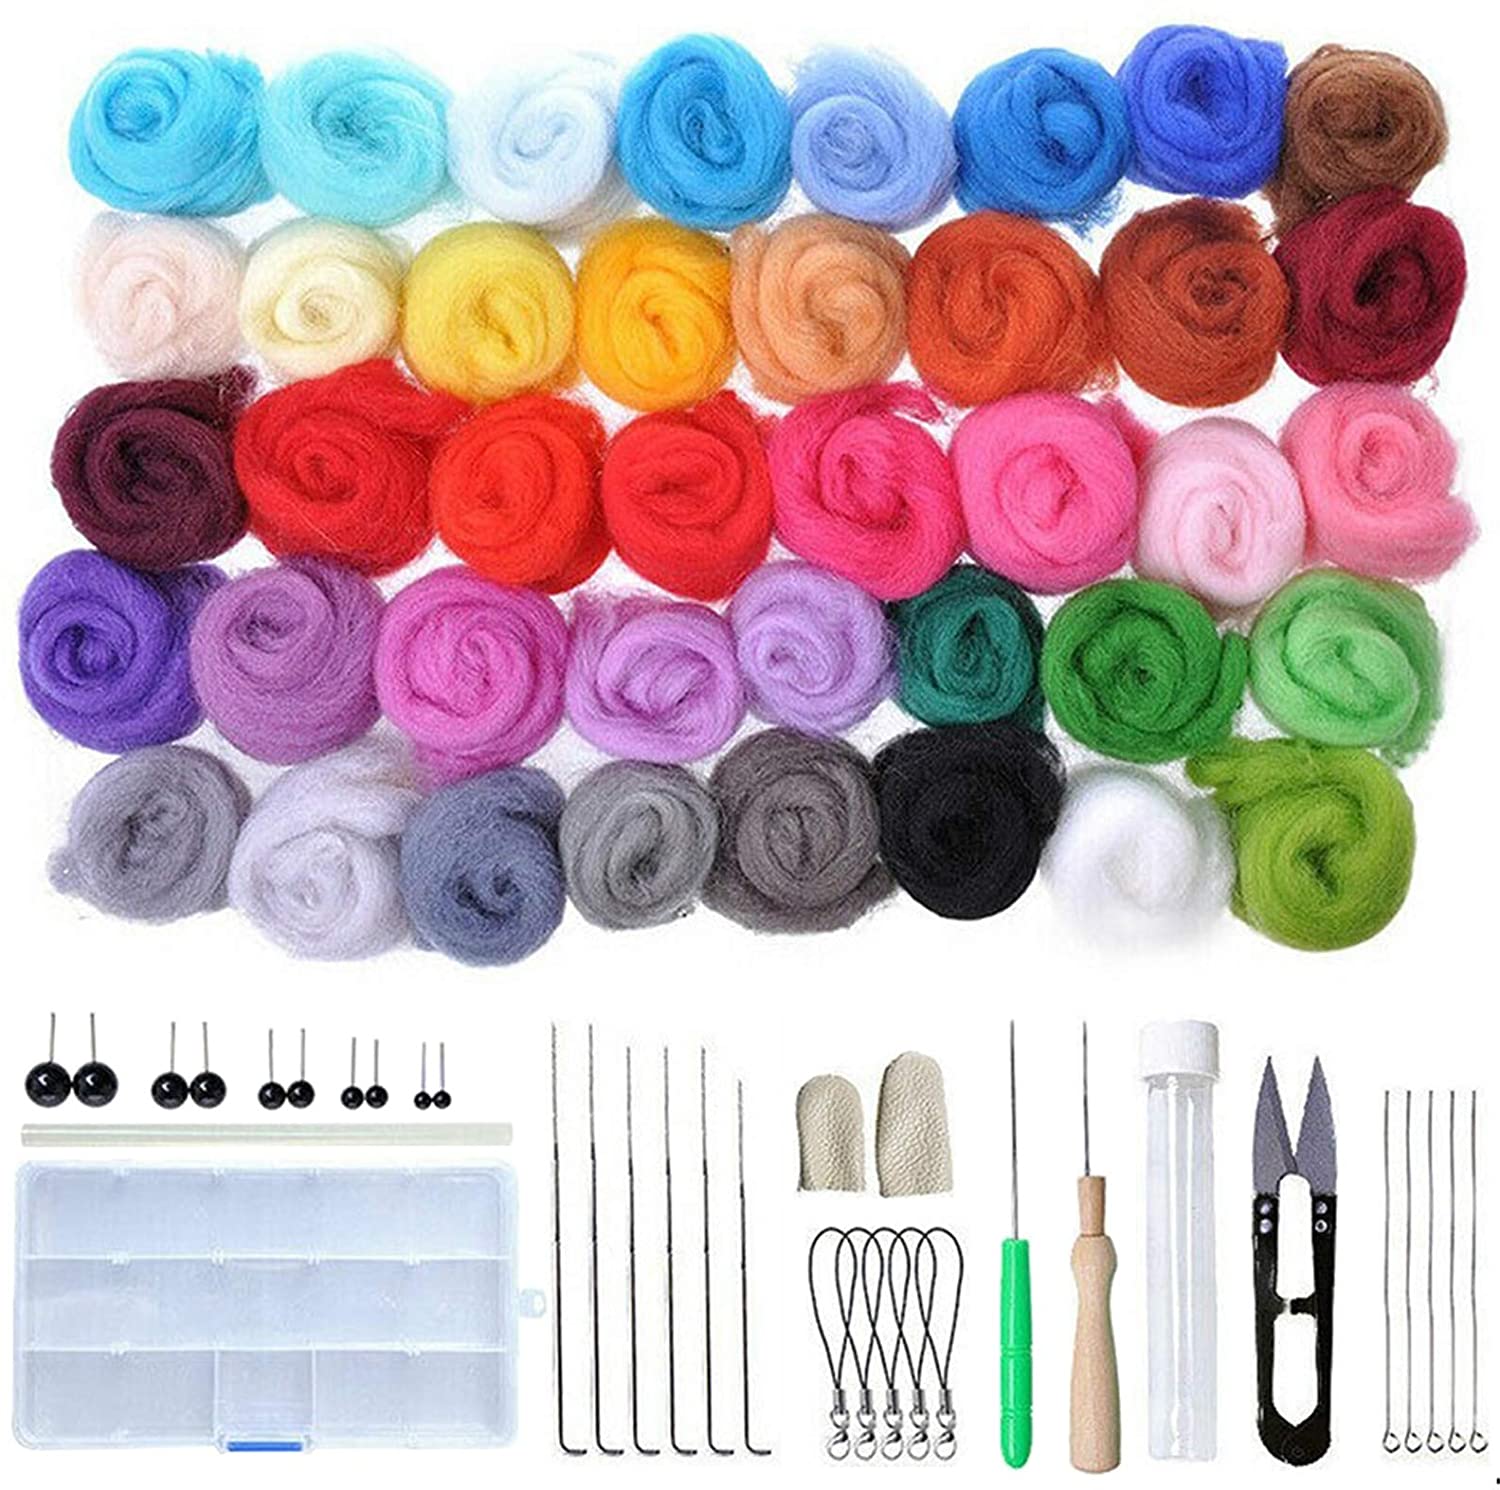 Needle Felting Kit,Wool Roving 40 Colors Set,Needle Felting Starter  Kit,Wool Felt Tools with Felting Tool Instruction Included for Felted  Animal